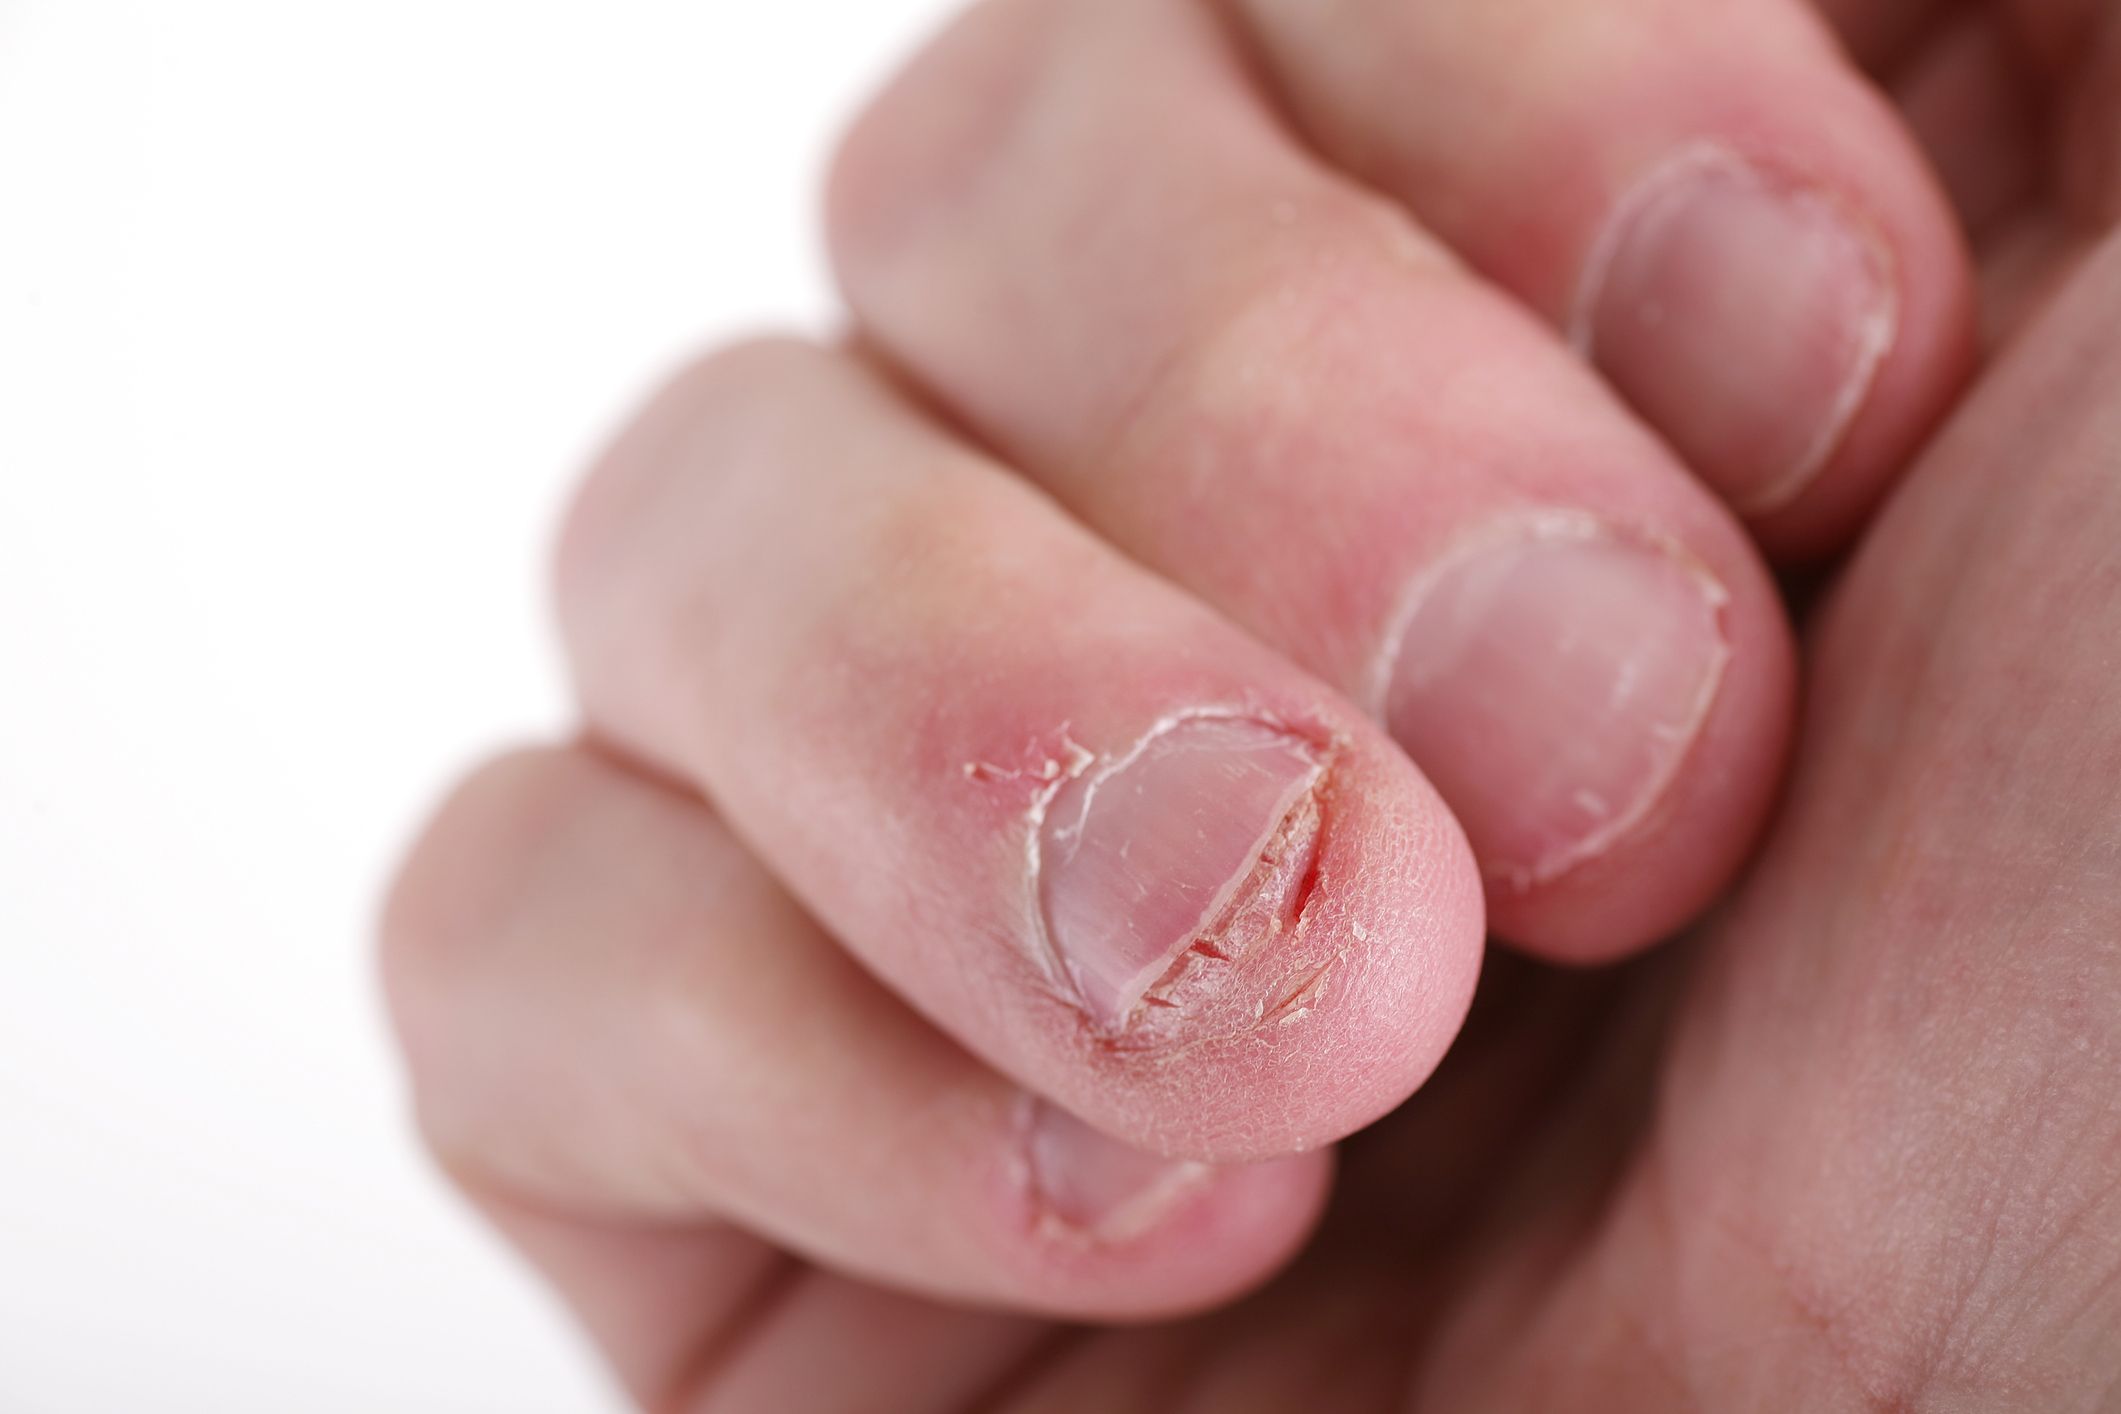 Dermatophagia: Symptoms, causes, and treatment